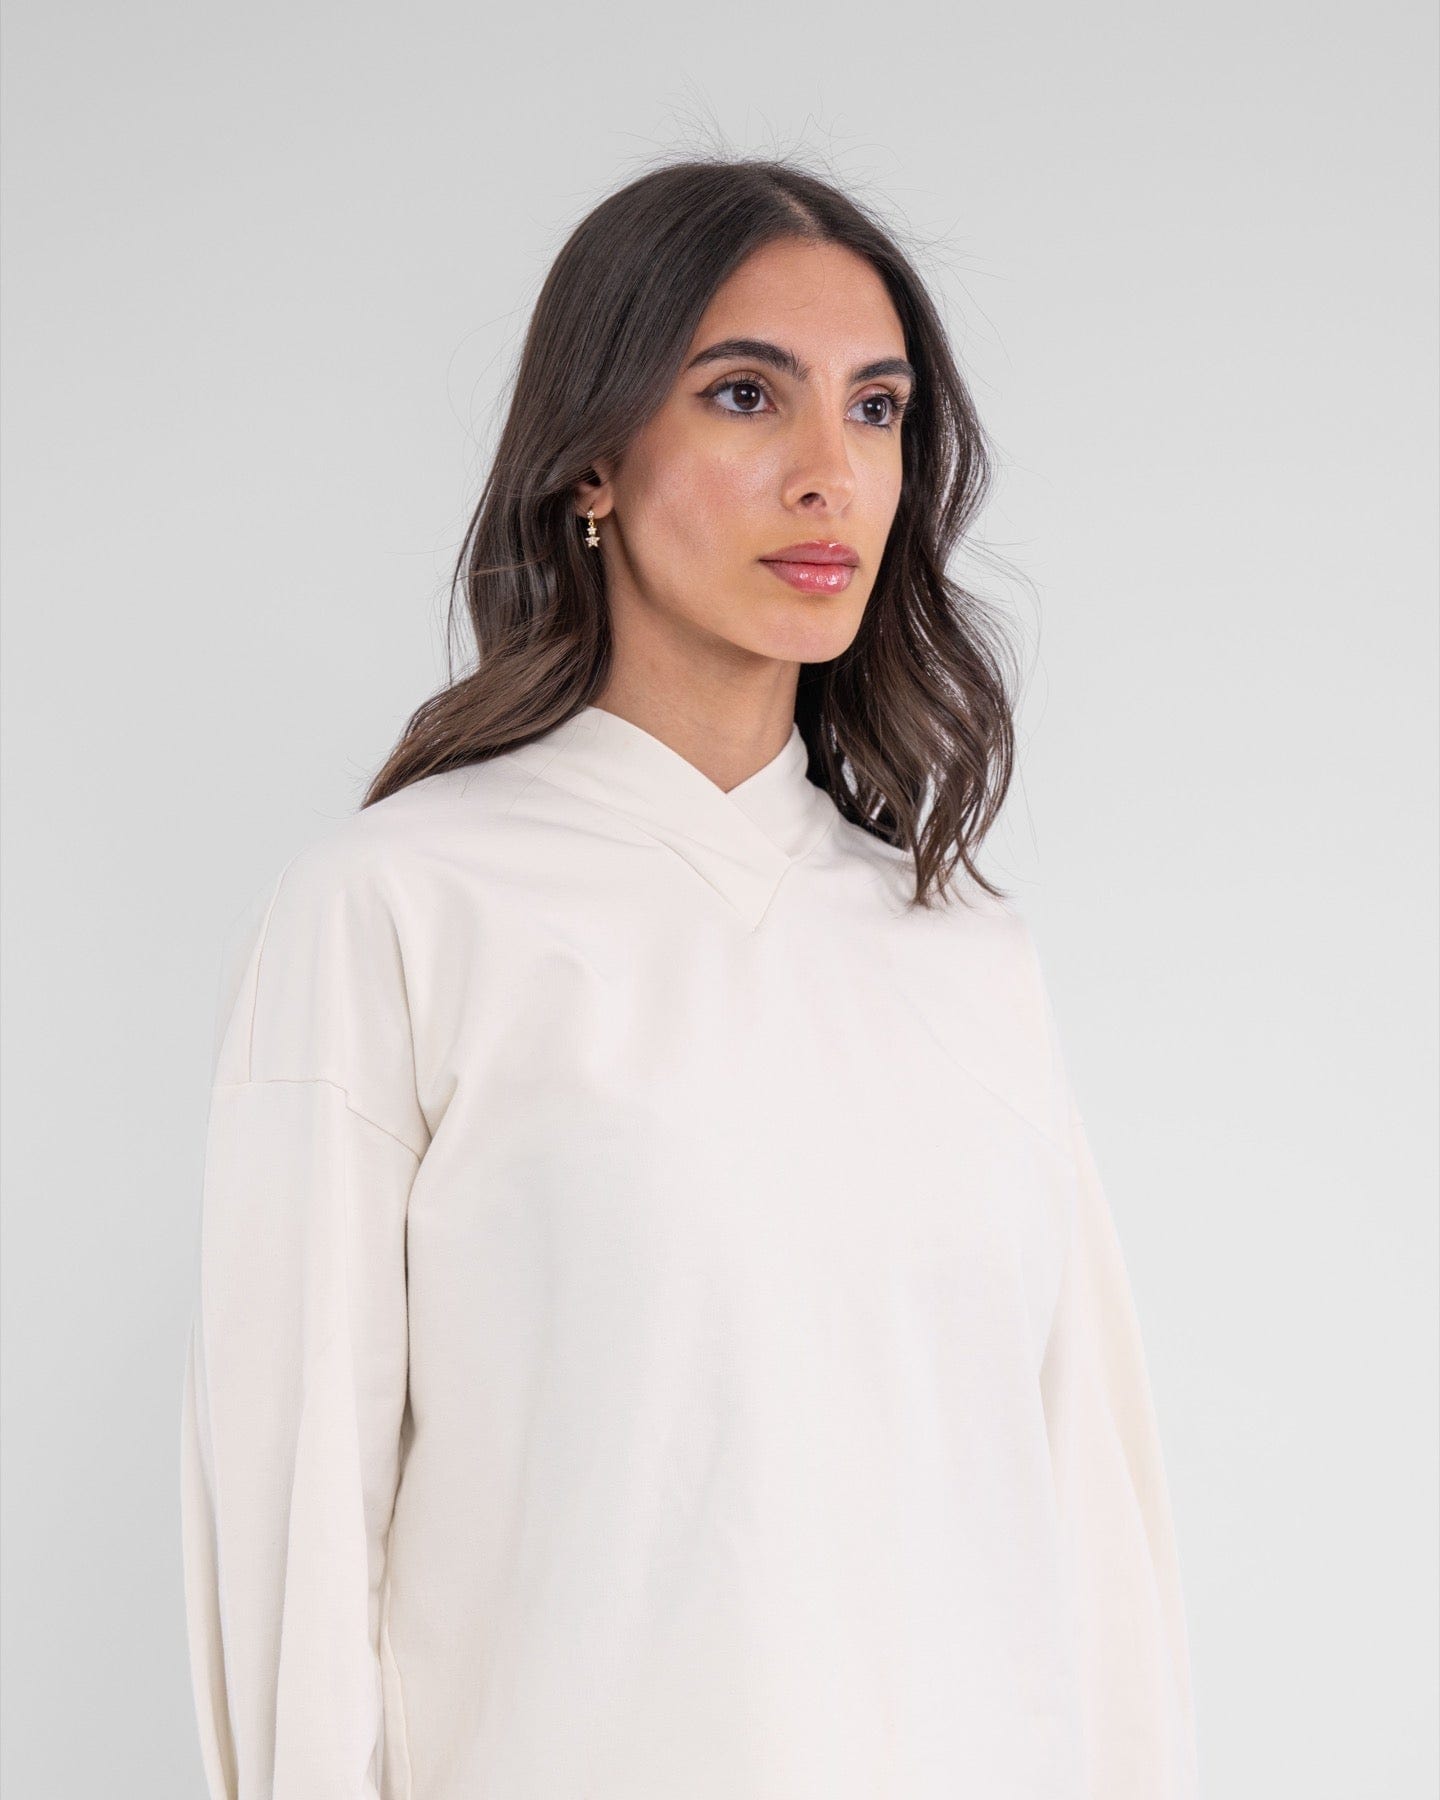 A woman with dark hair wearing an Off White modest SWEATER made of brrr° material, featuring moisture resistance and rapid drying capabilities, with the brand "qynda" on it, looking.